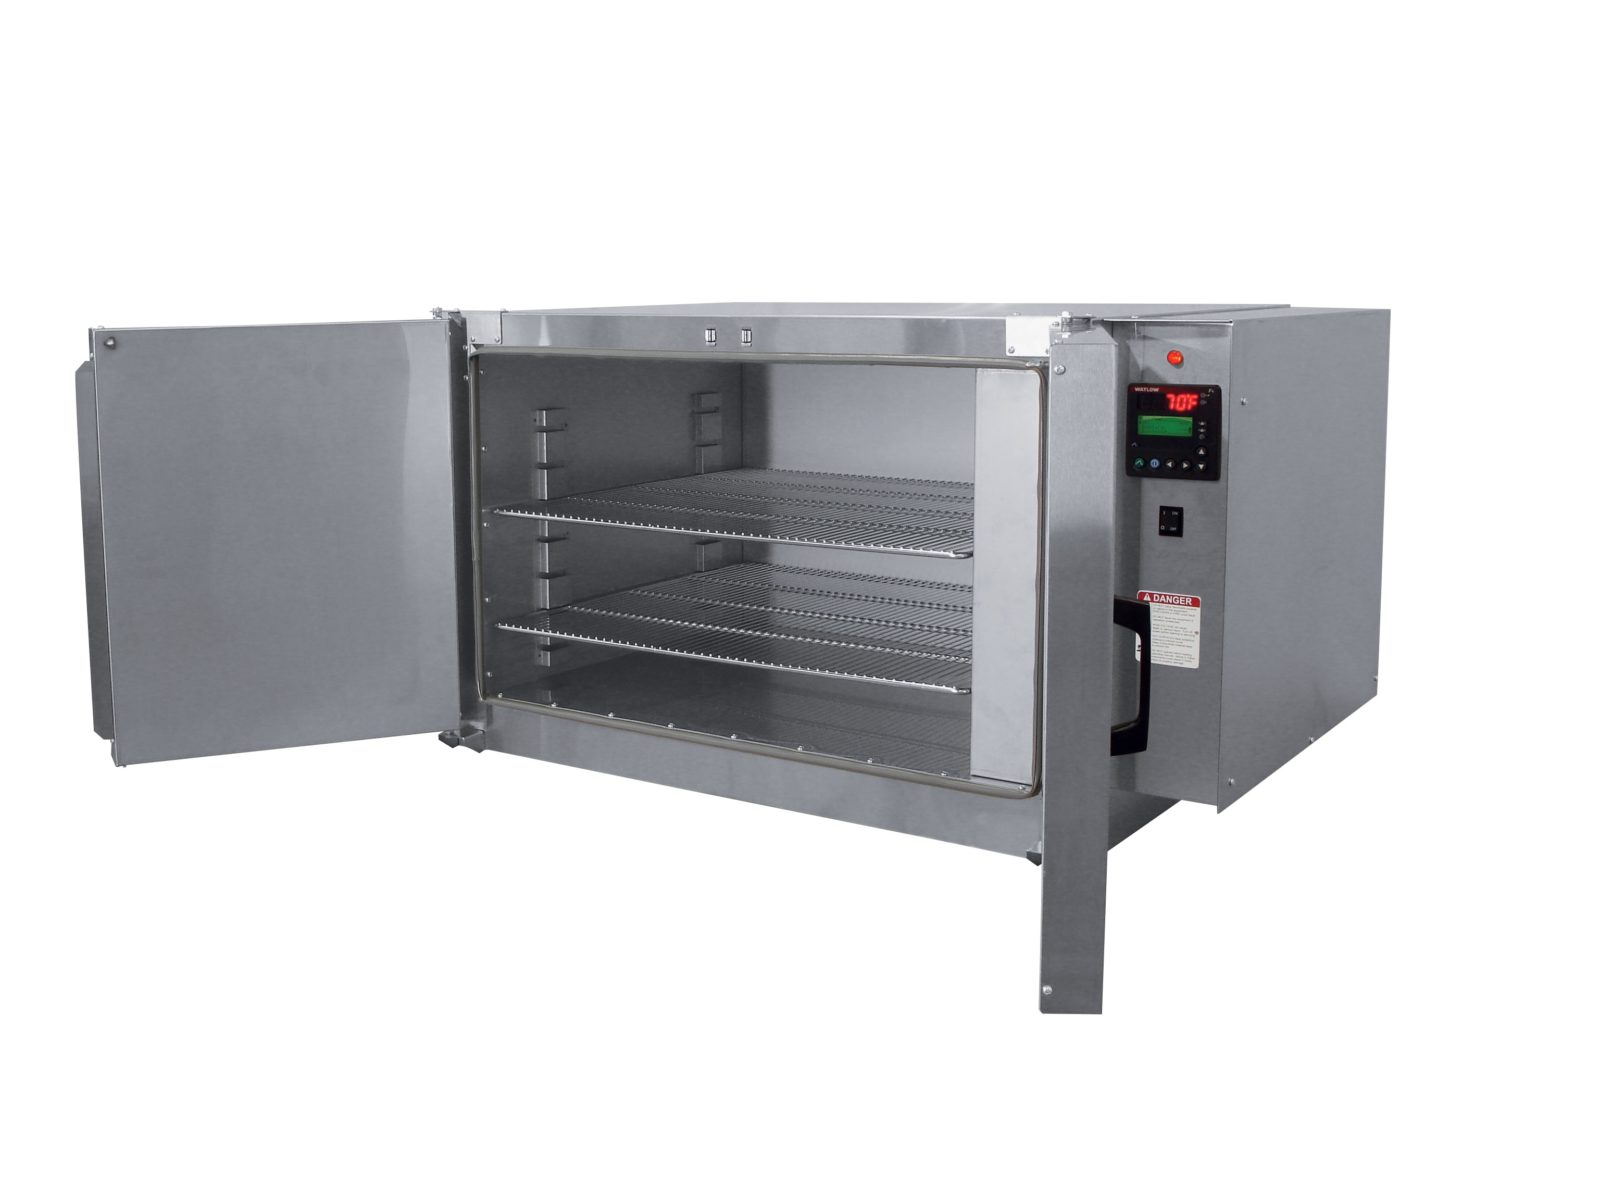 China Multifunctional Electric Oven for Baking Suppliers, Manufacturers,  Factory - Good Price - RISEN